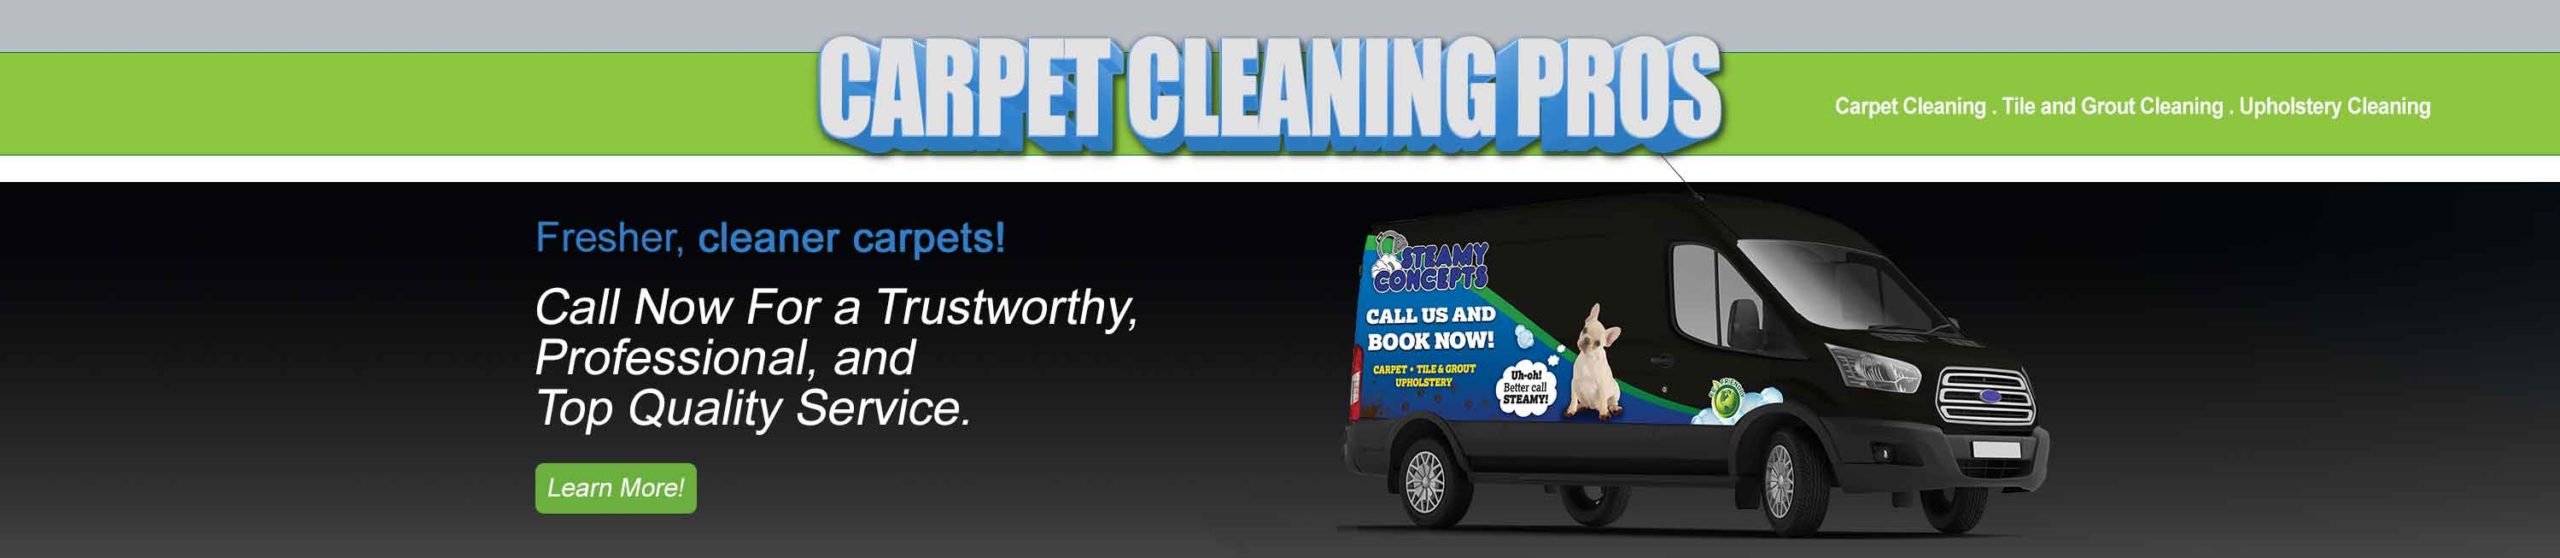 Carpet Cleaning Phoenix Header And Service